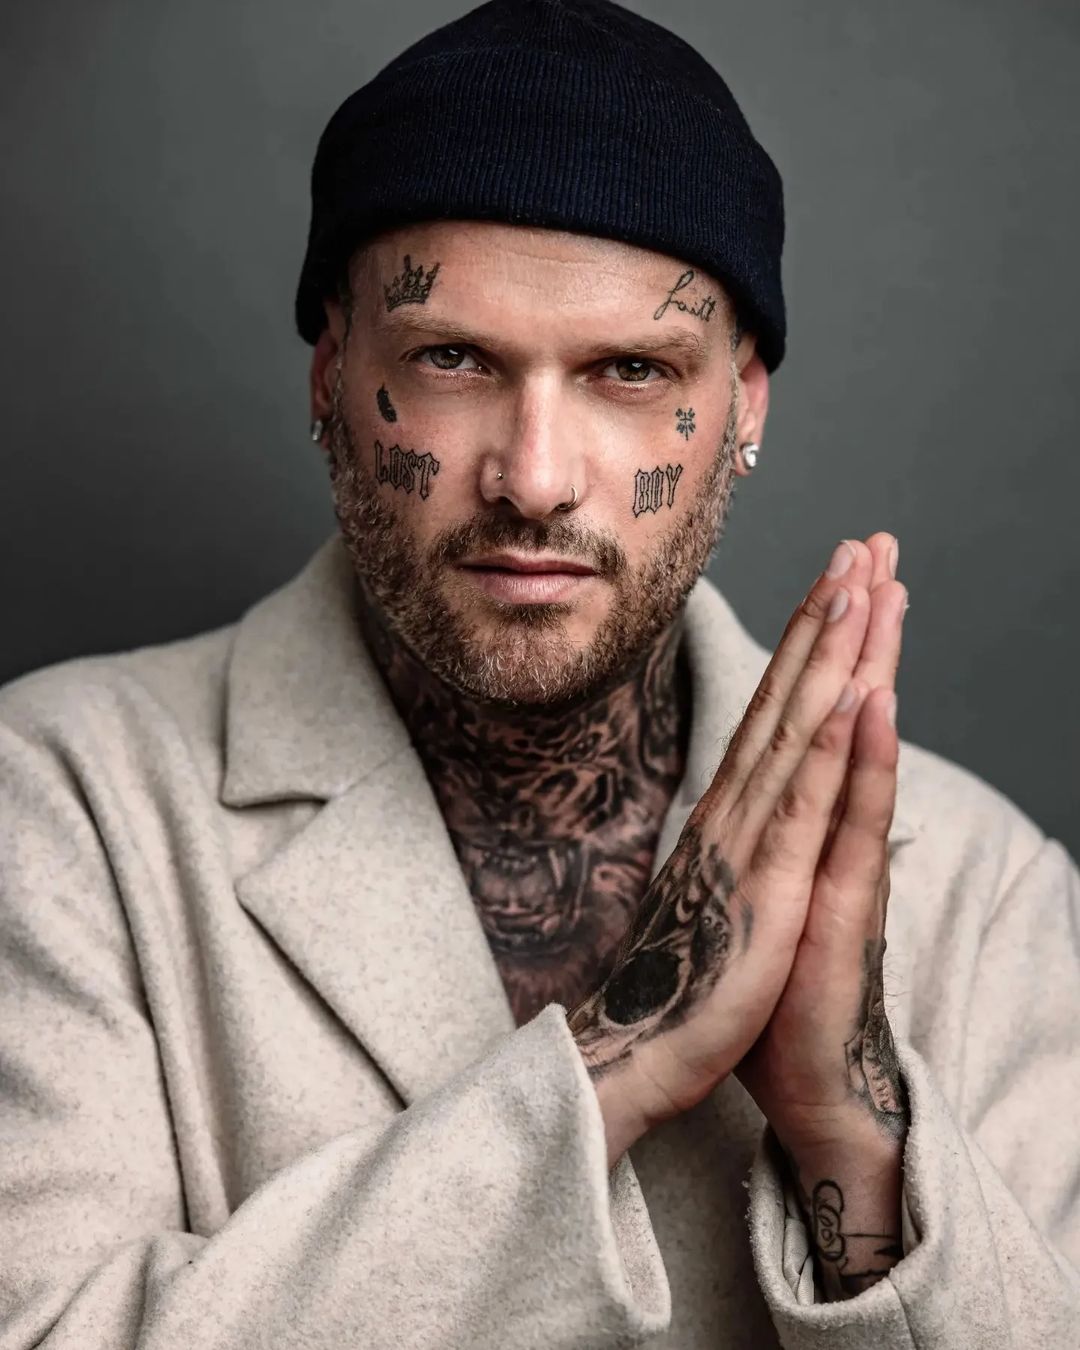 Praying Shaved Head Man with Tattoos on His Arm. Stock Photo - Image of  confident, businessman: 116321528